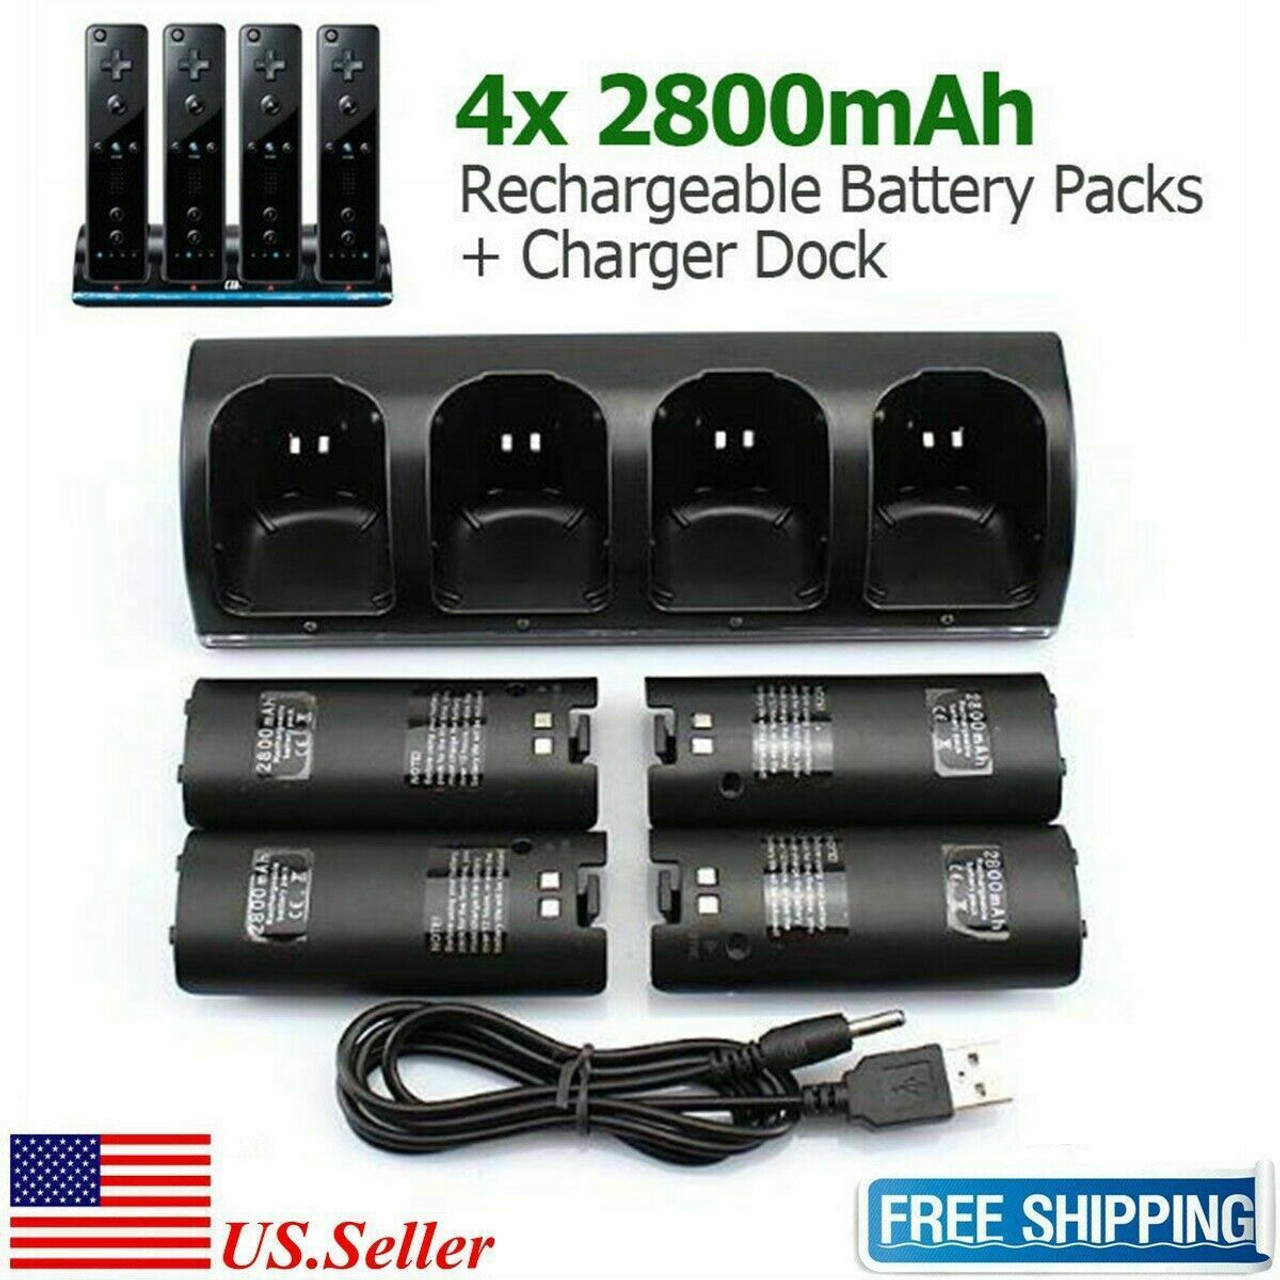 Charger Charging Dock Station + 2800mAh Battery For Wii /Wii U Remote Controller